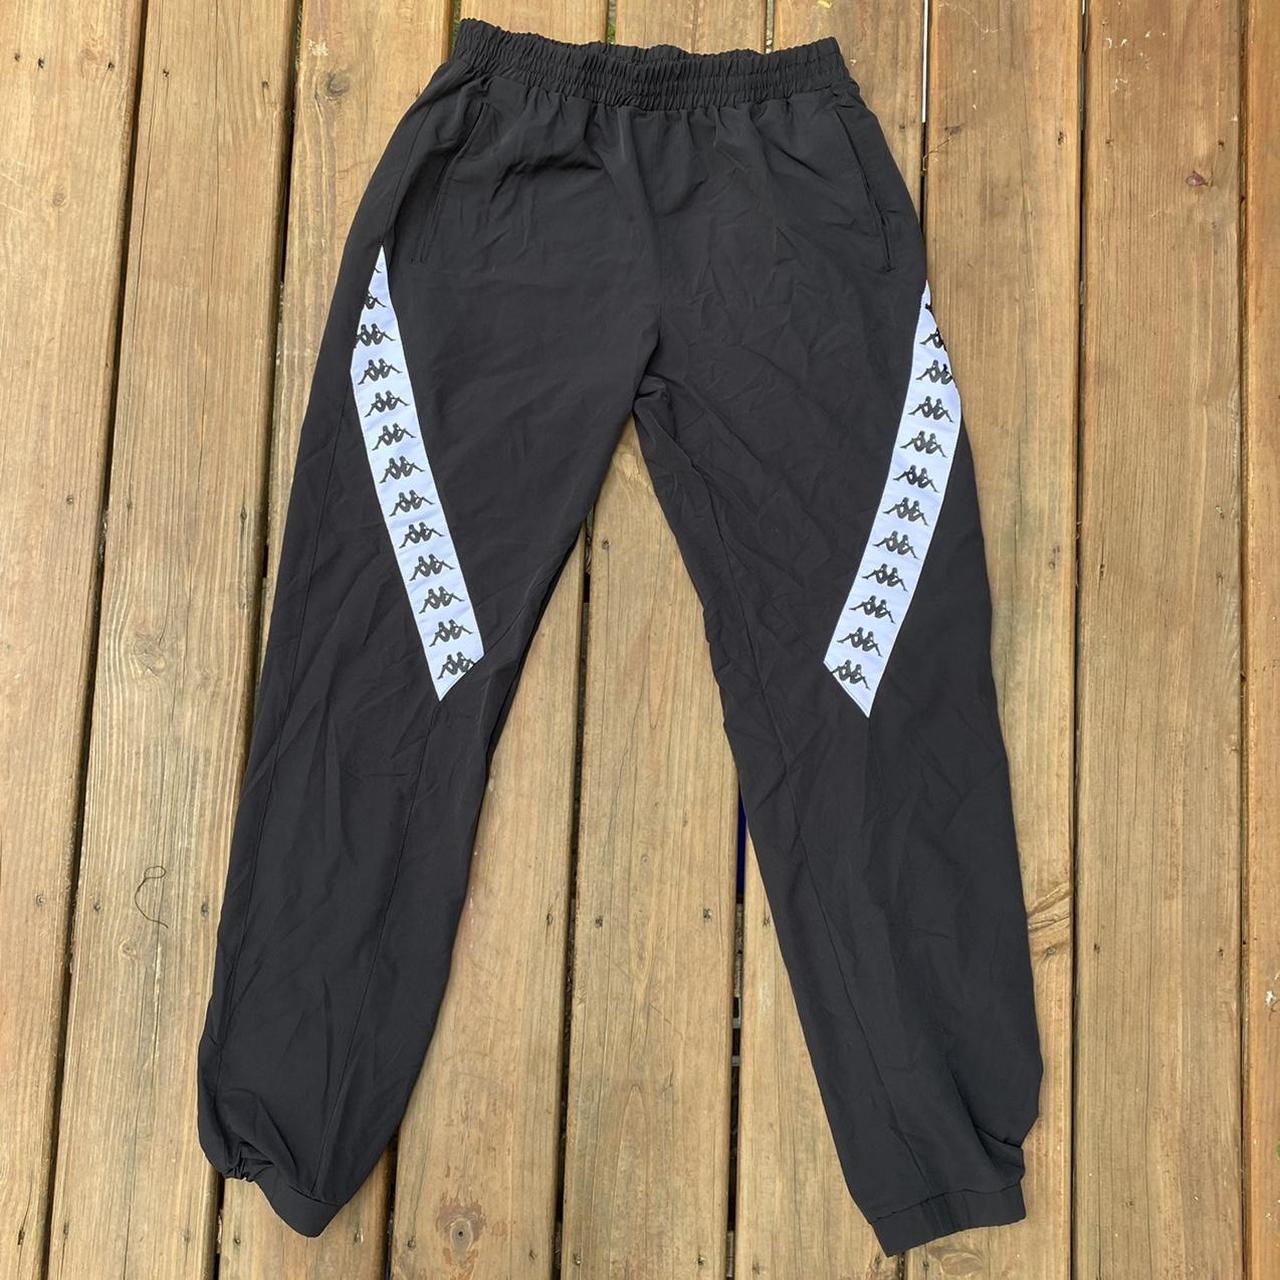 Vintage Kappa Track Pants in size small. As you - Depop